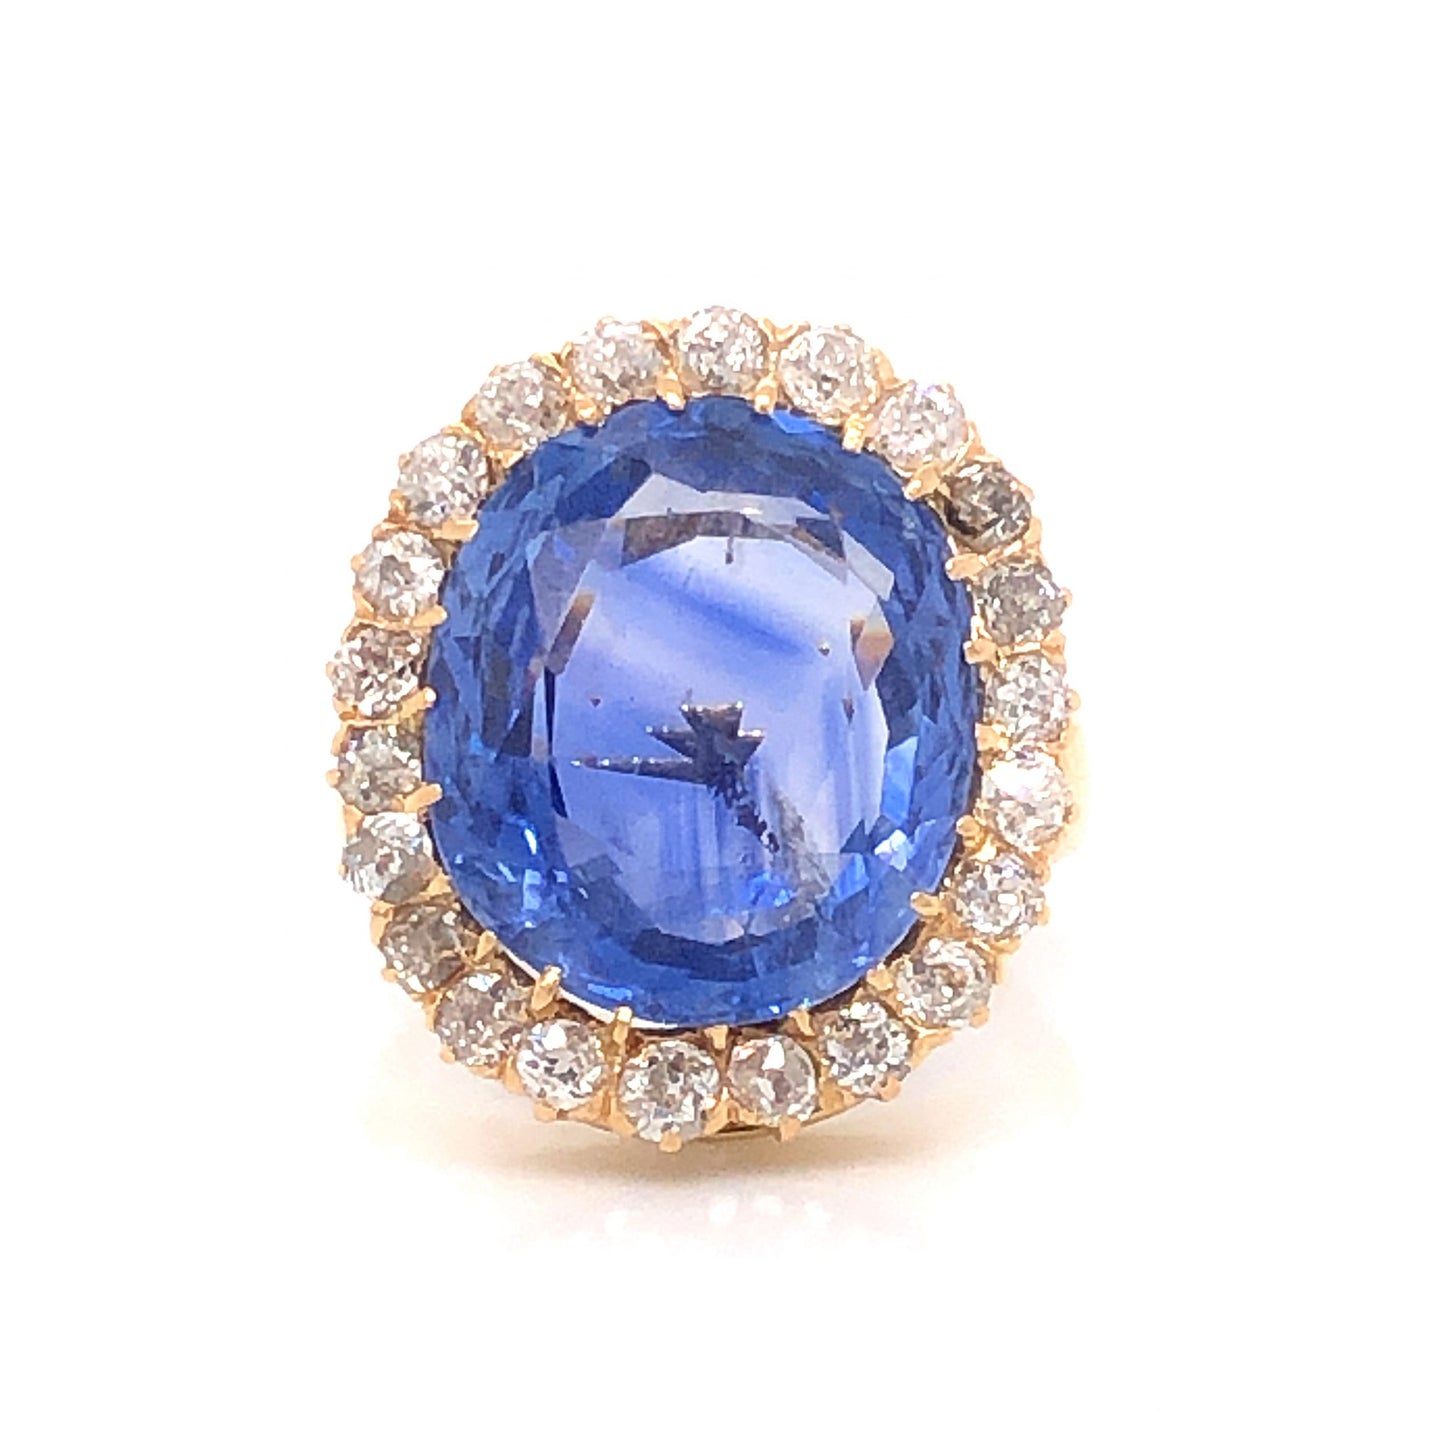 9.62 Victorian Blue Spinel & Diamond Cocktail Ring in 14k